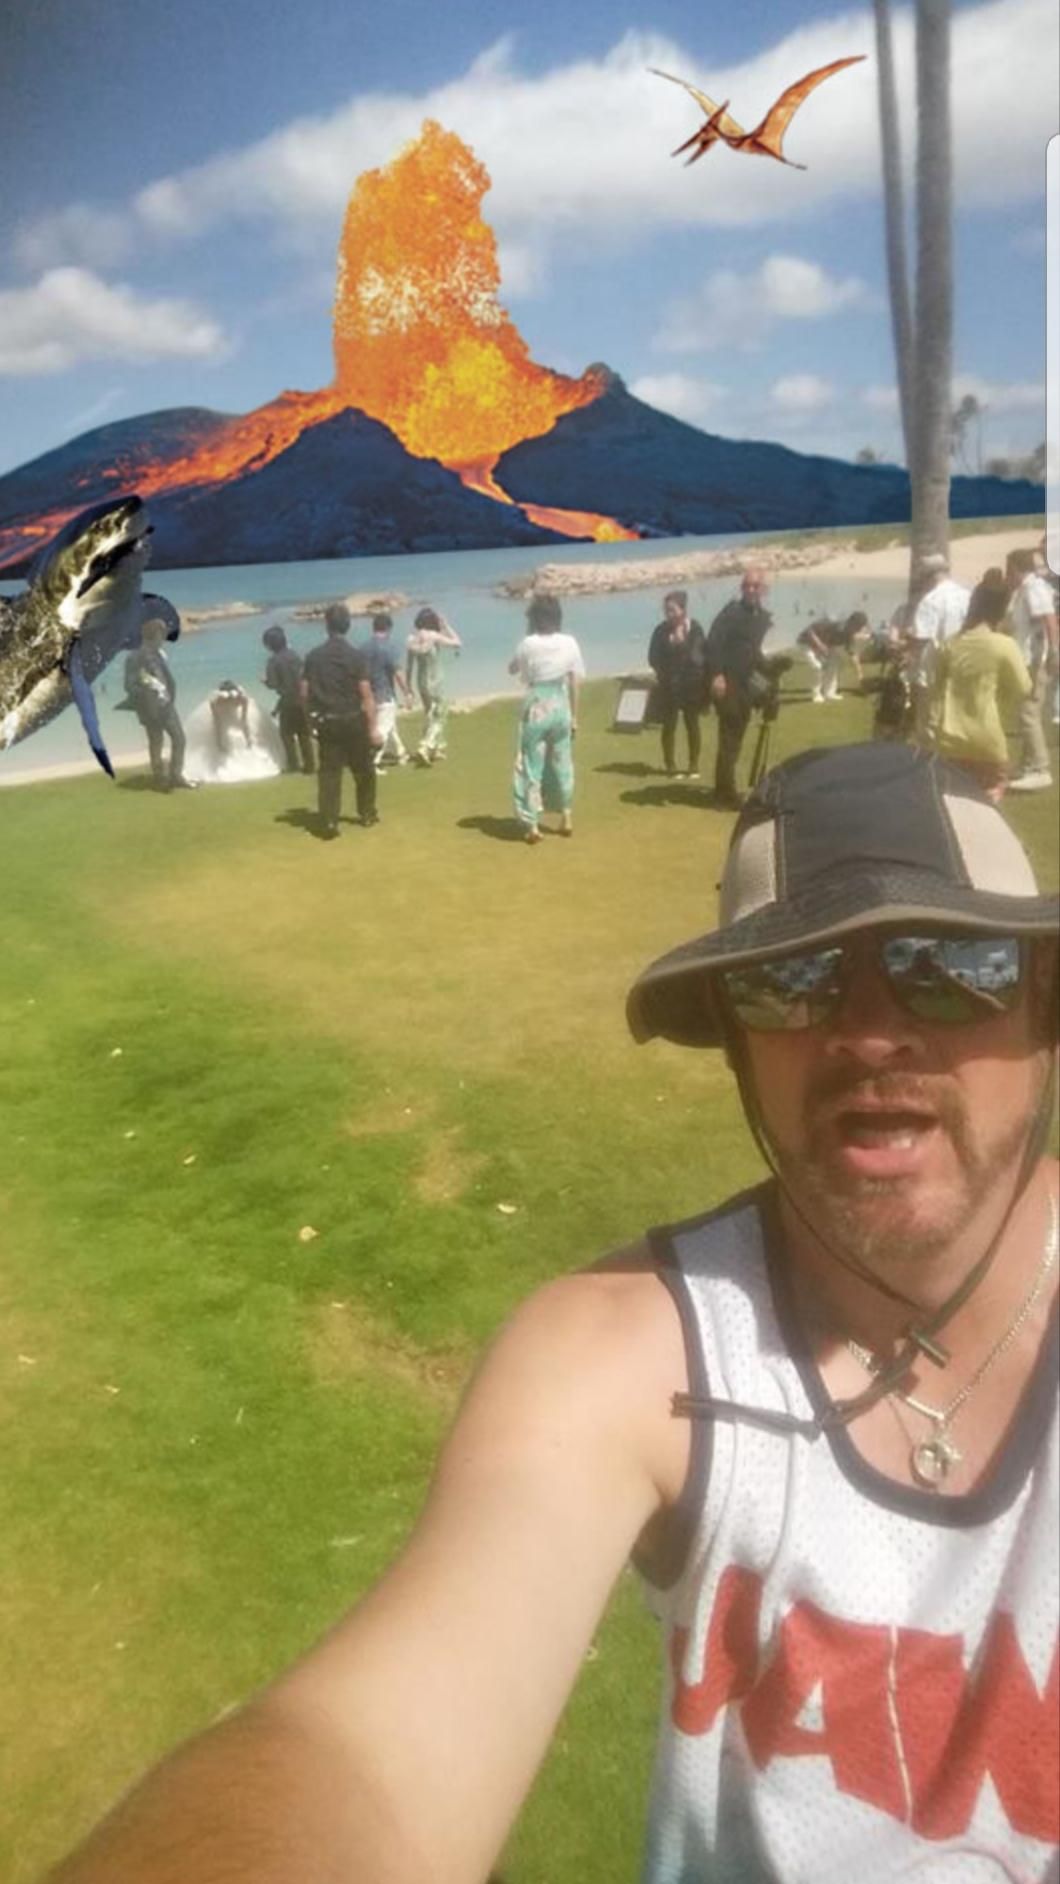 My buddy left Texas to help out in Hawaii. I may have doctored minor details in the photo. I'll donate $10 for every 100 upvotes towards those in need in Hawaii.